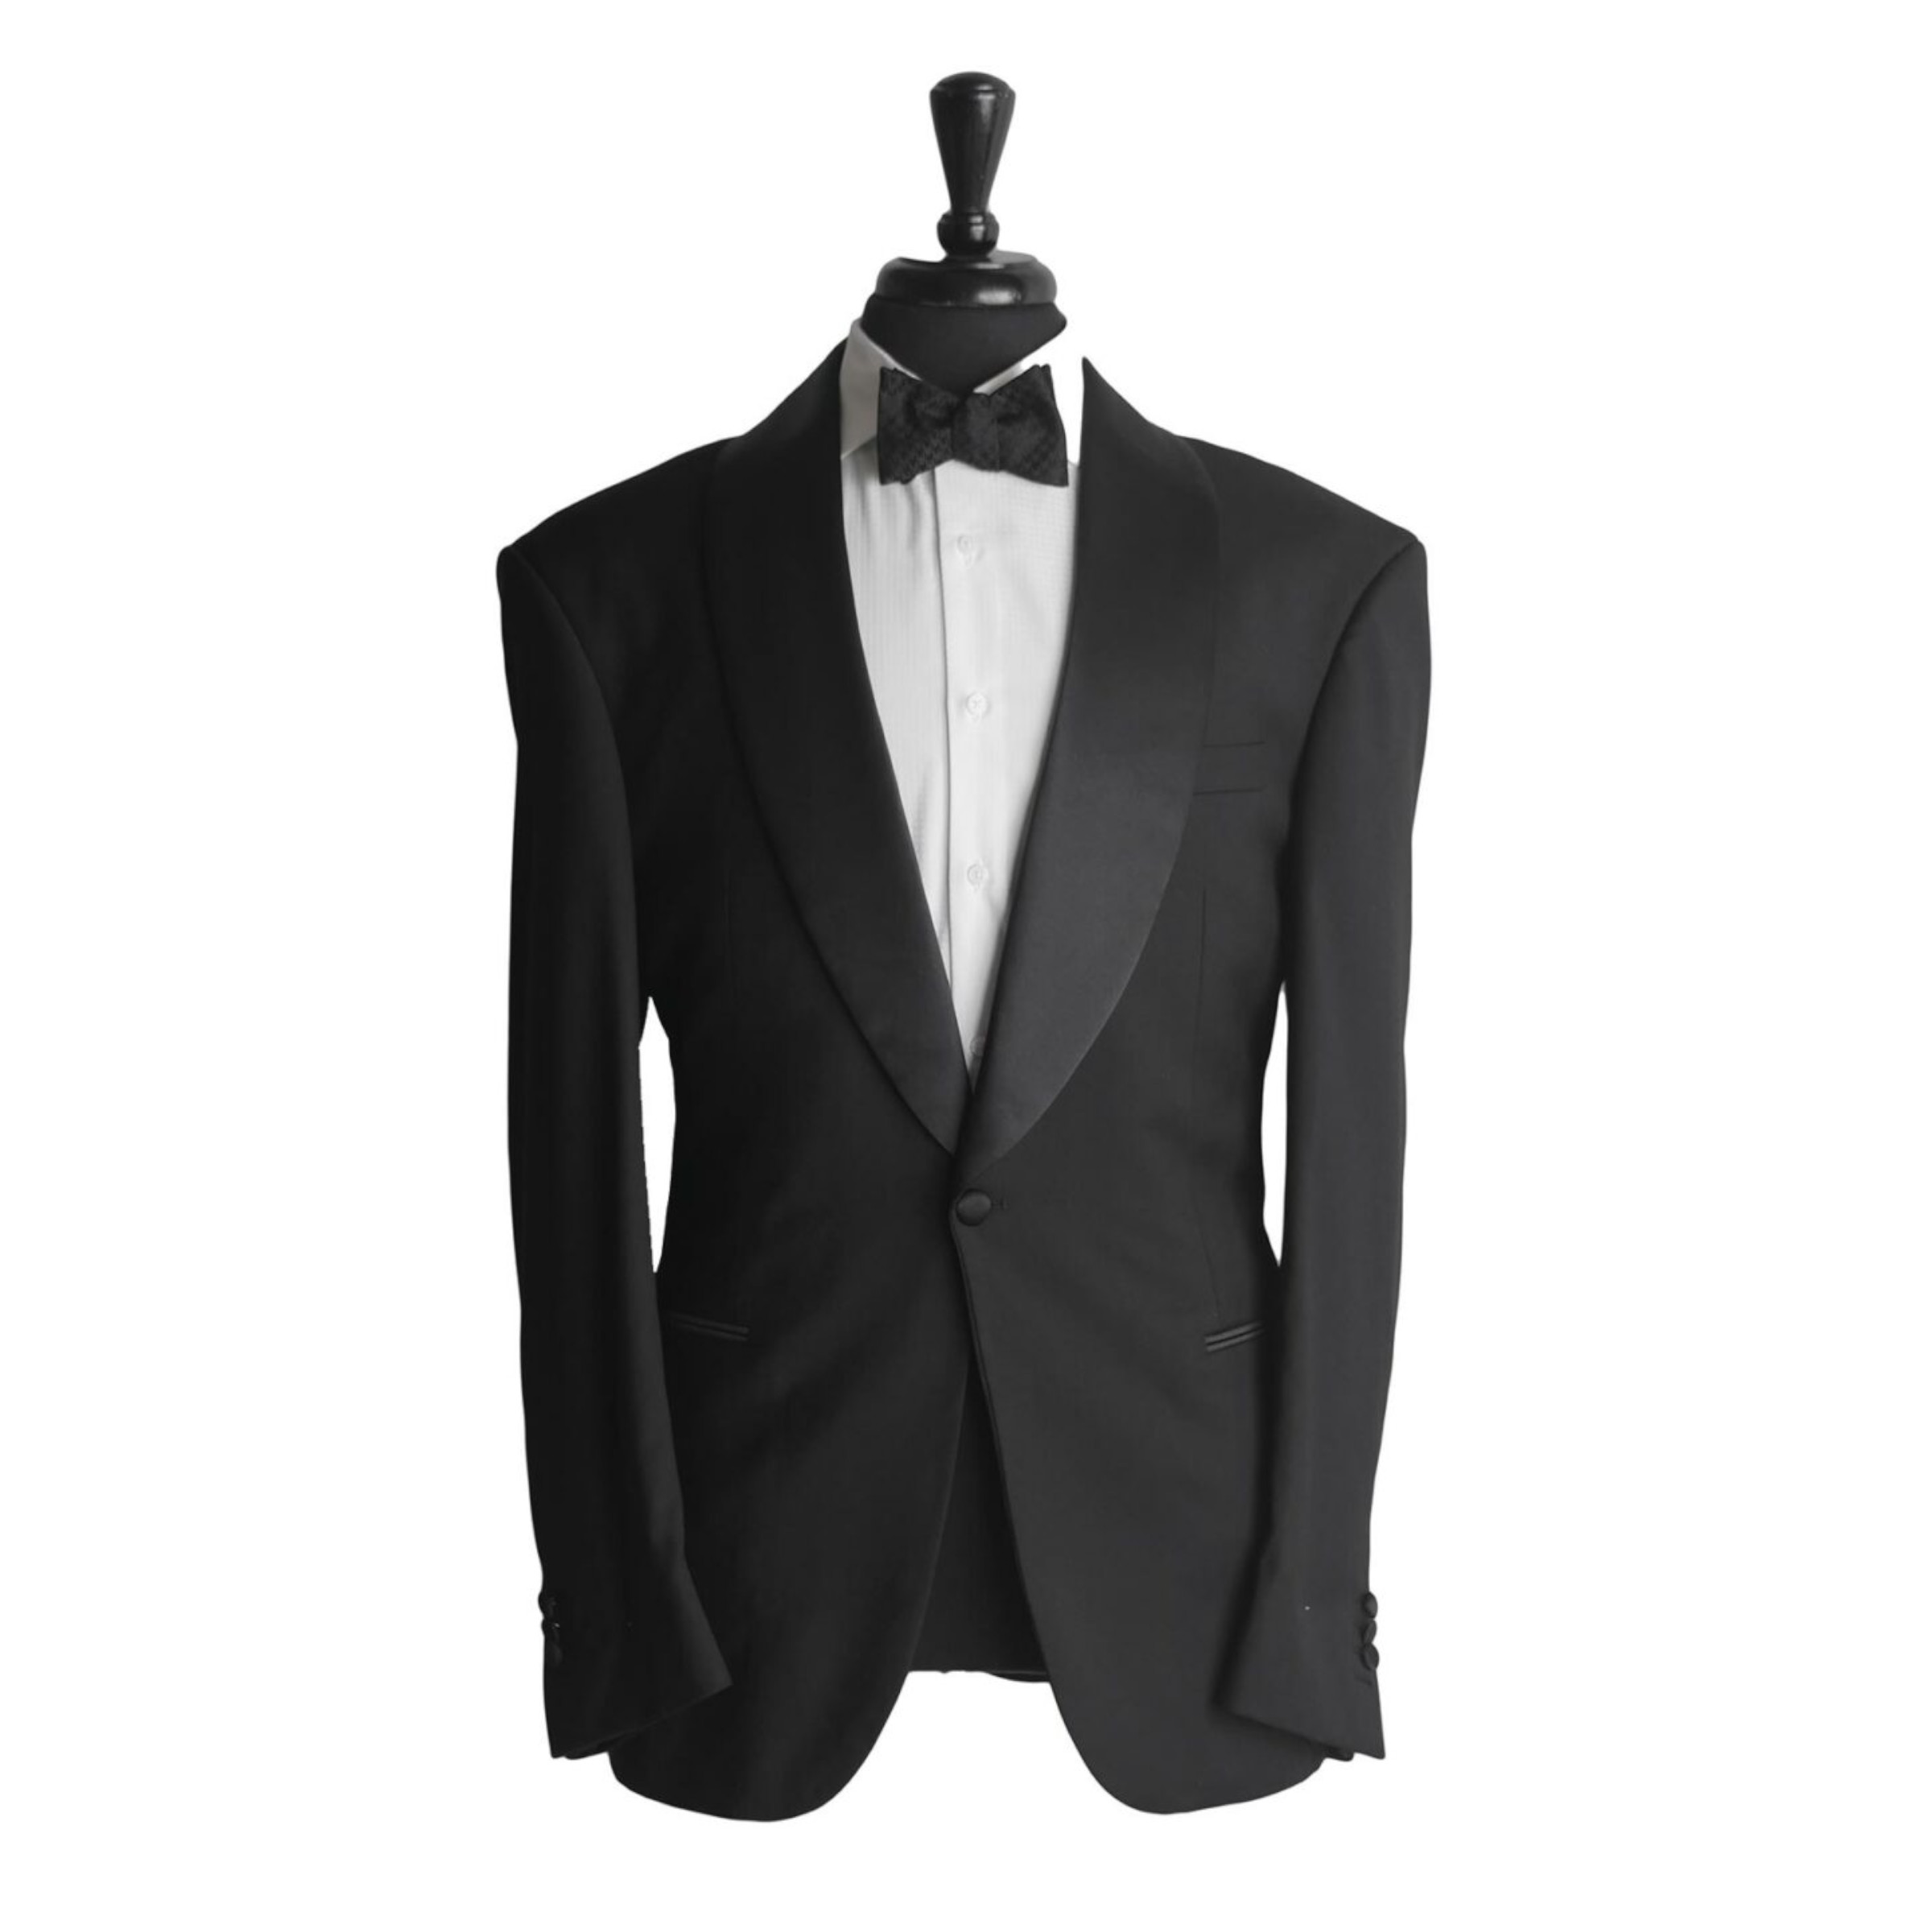 A black tuxedo jacket on a body form with a bkack bowtie and white shirt on a white background